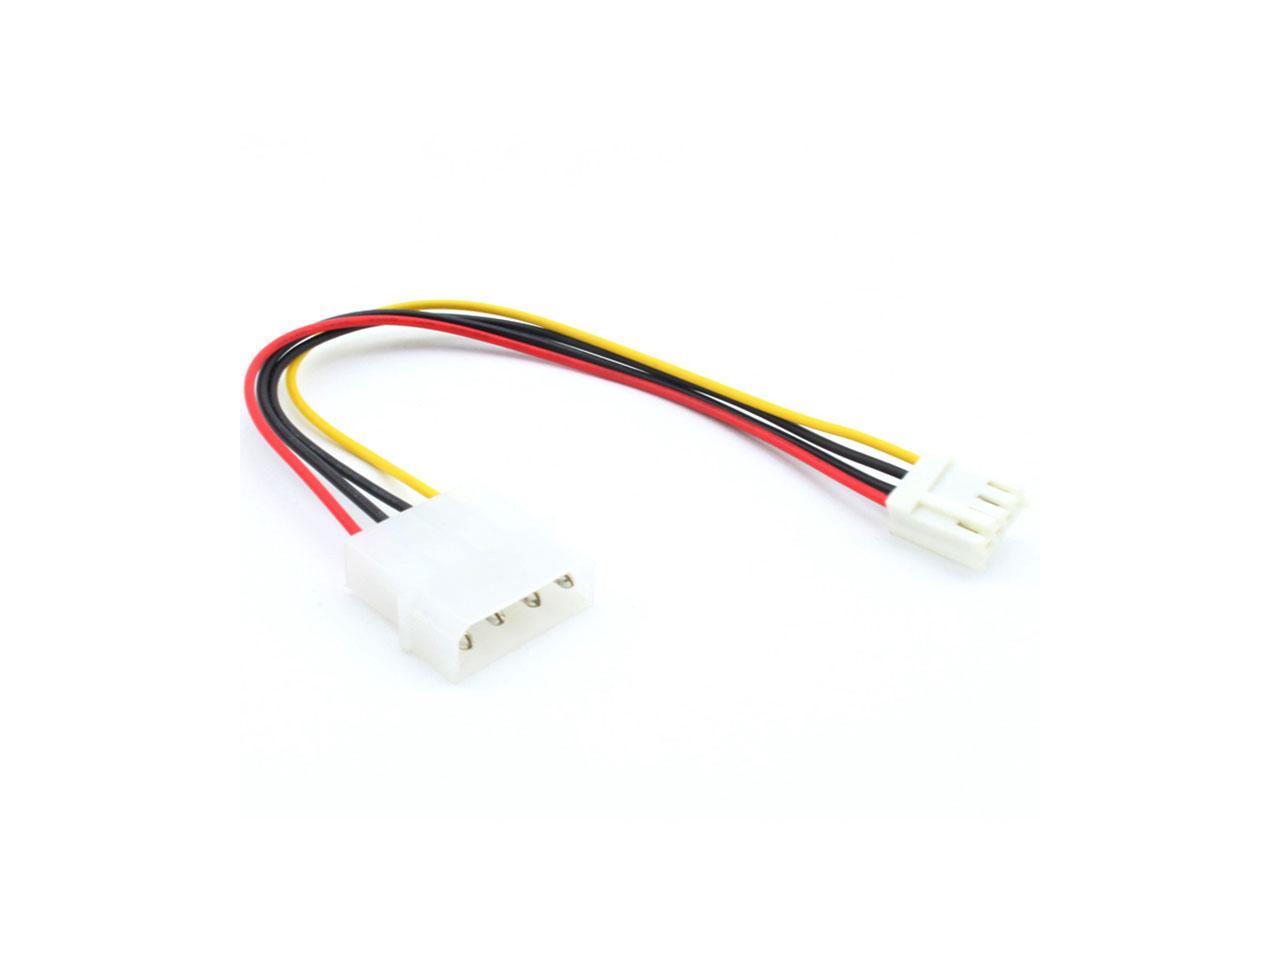 New 4 Pin Molex To 3.5 Floppy 4 Pin Adapter cable 